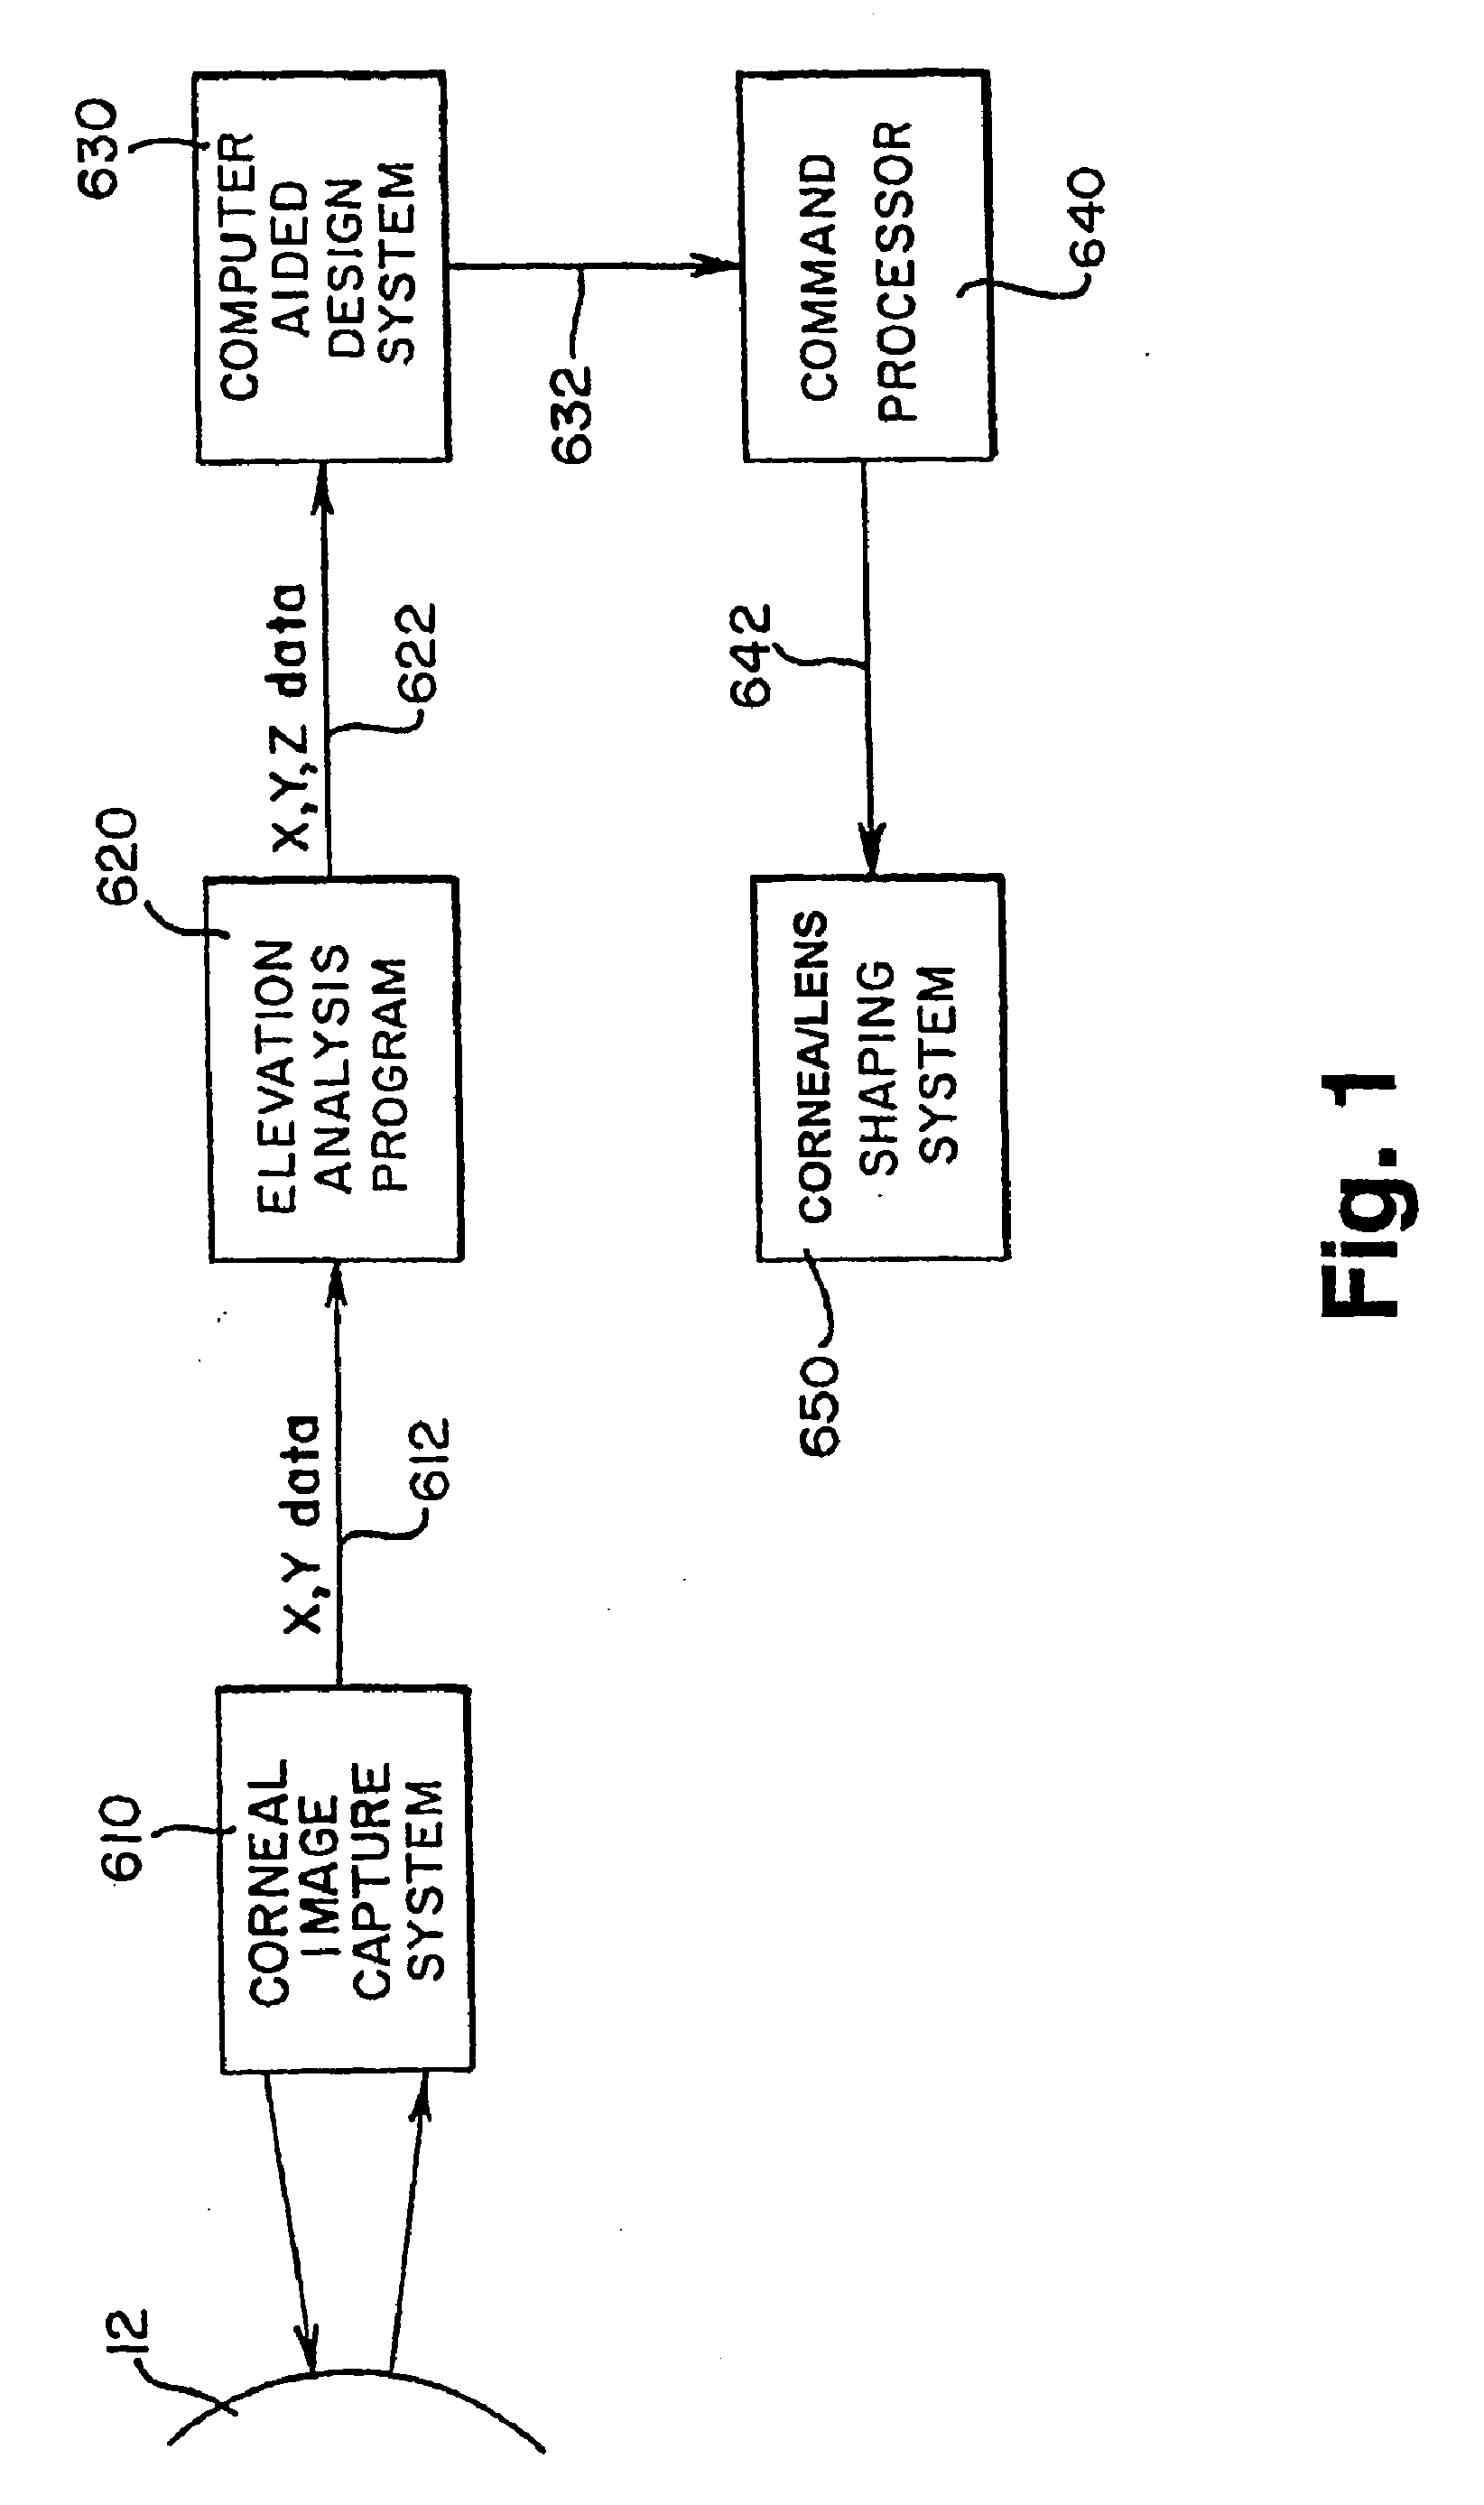 Method and apparatus for universal improvement of vision